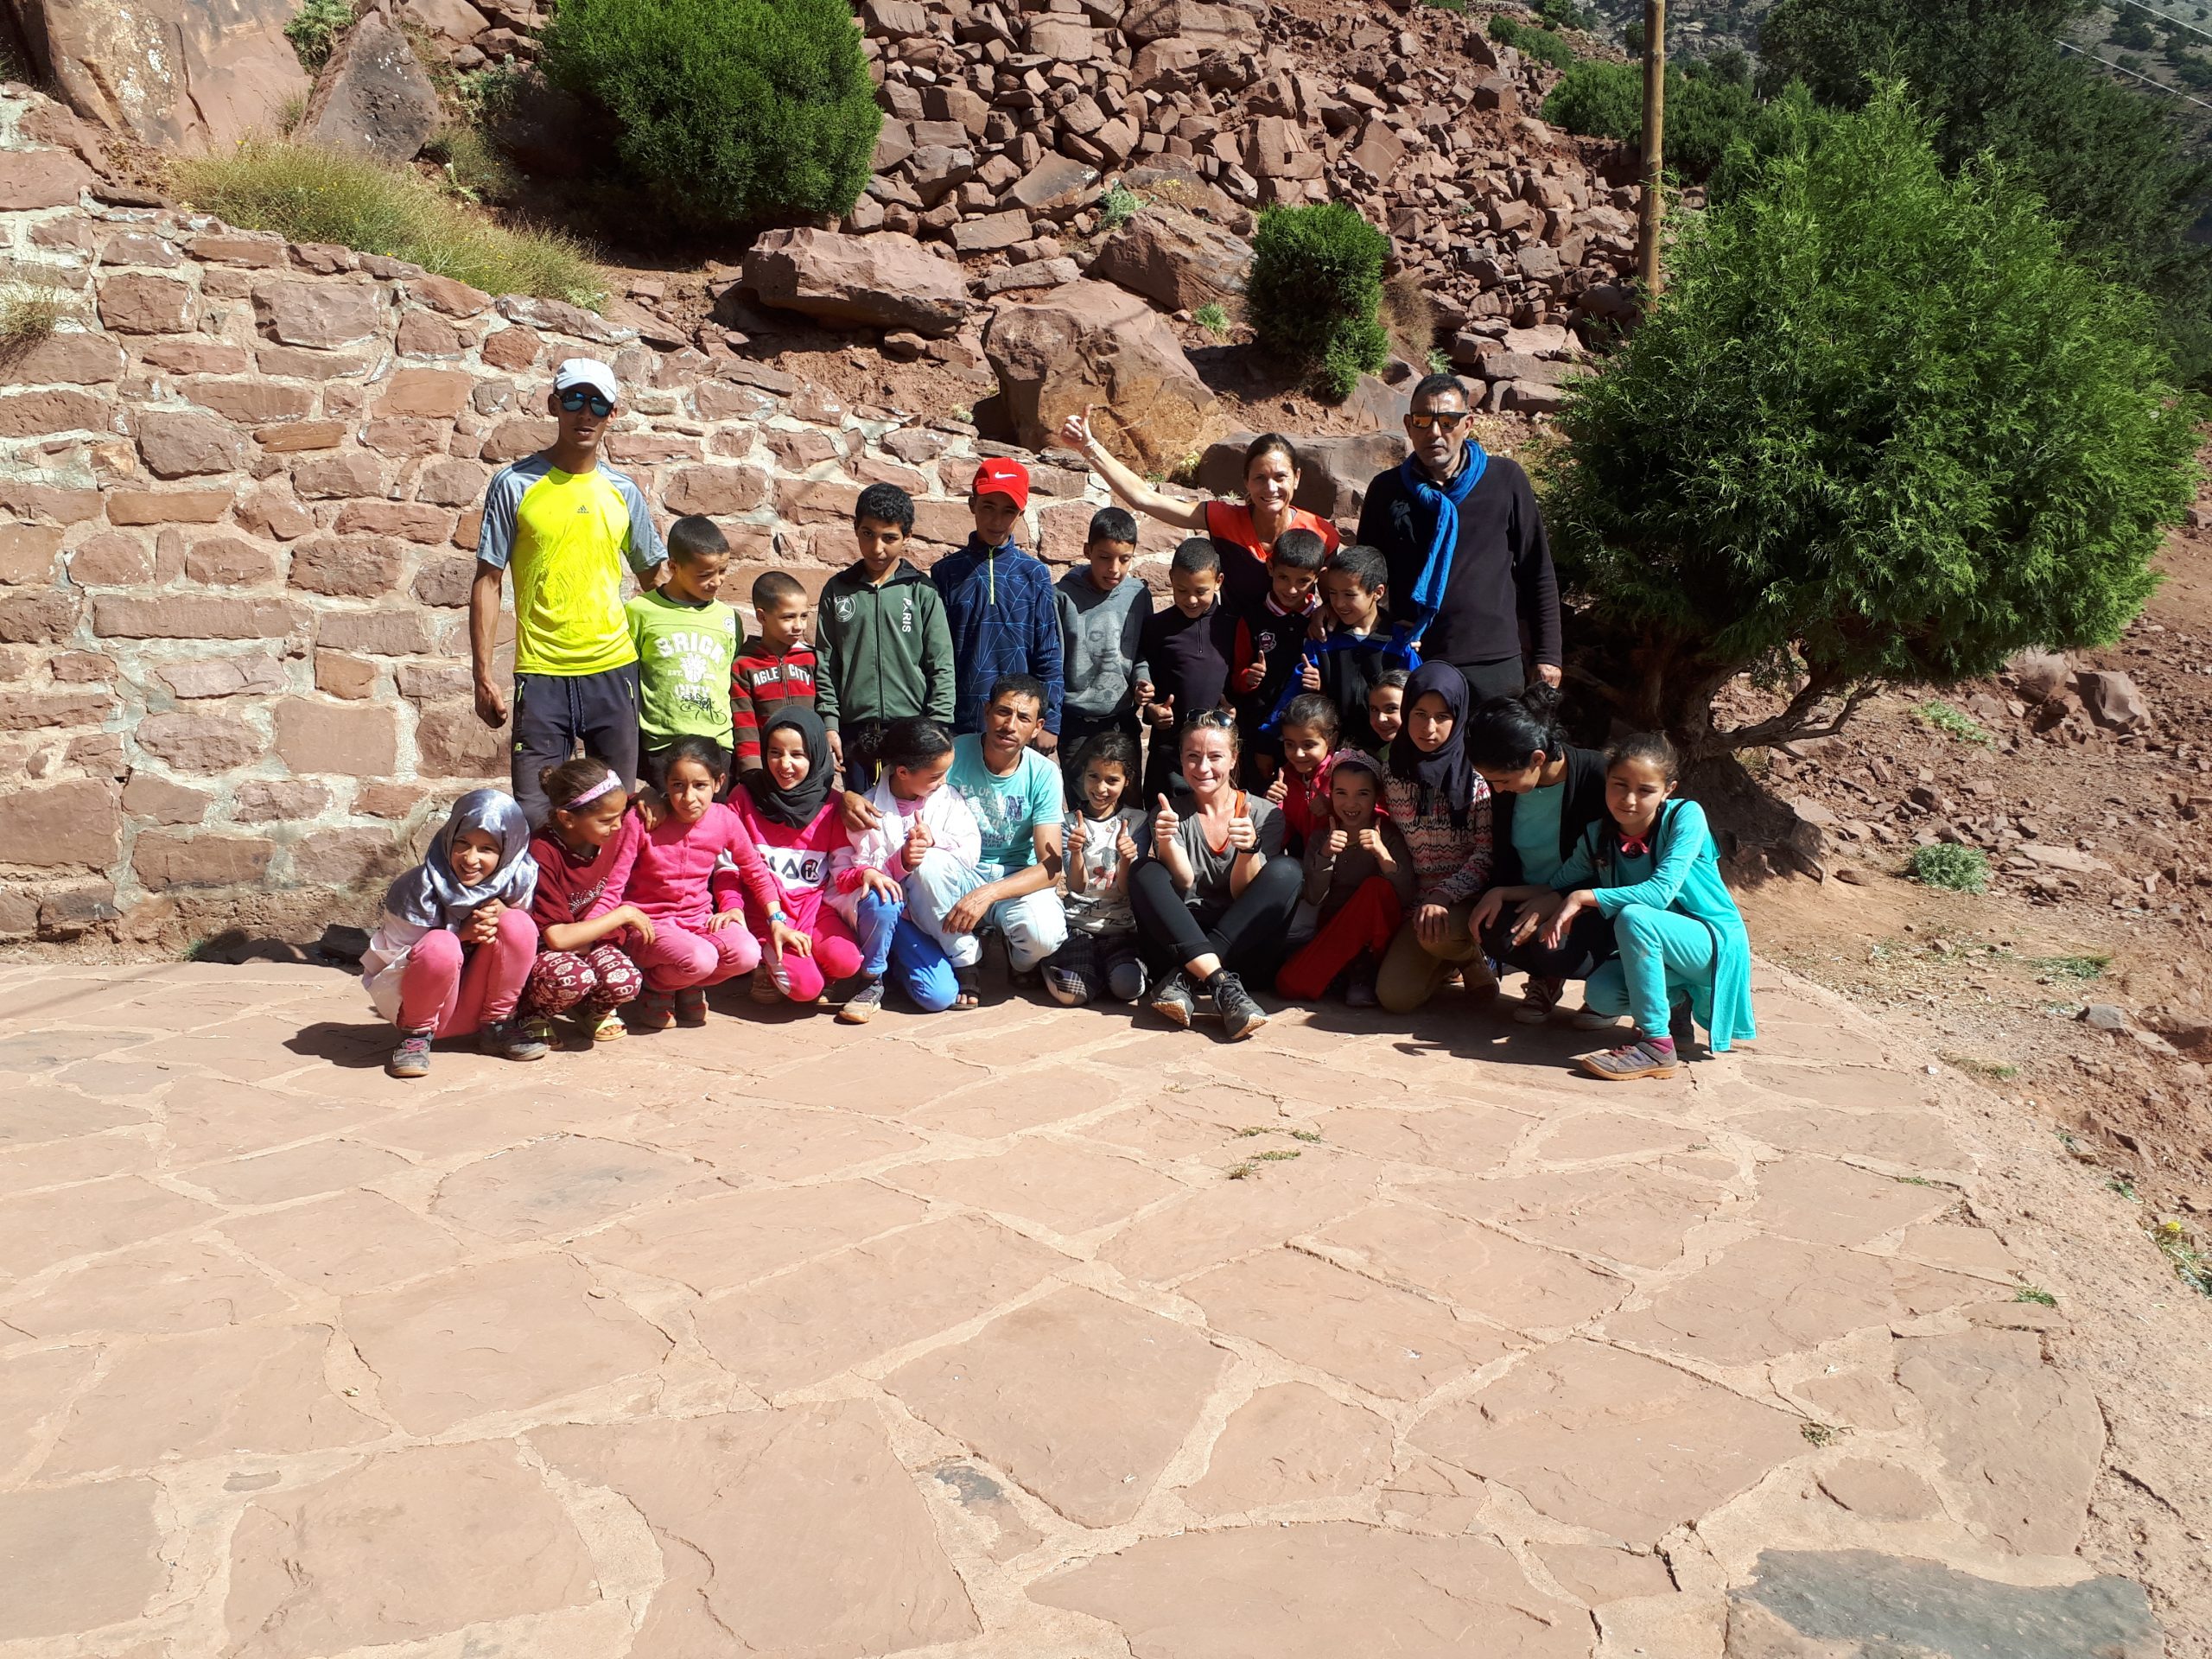 A SPORTS RAID AND SUPPORT FOR MOROCCAN FAMILIES